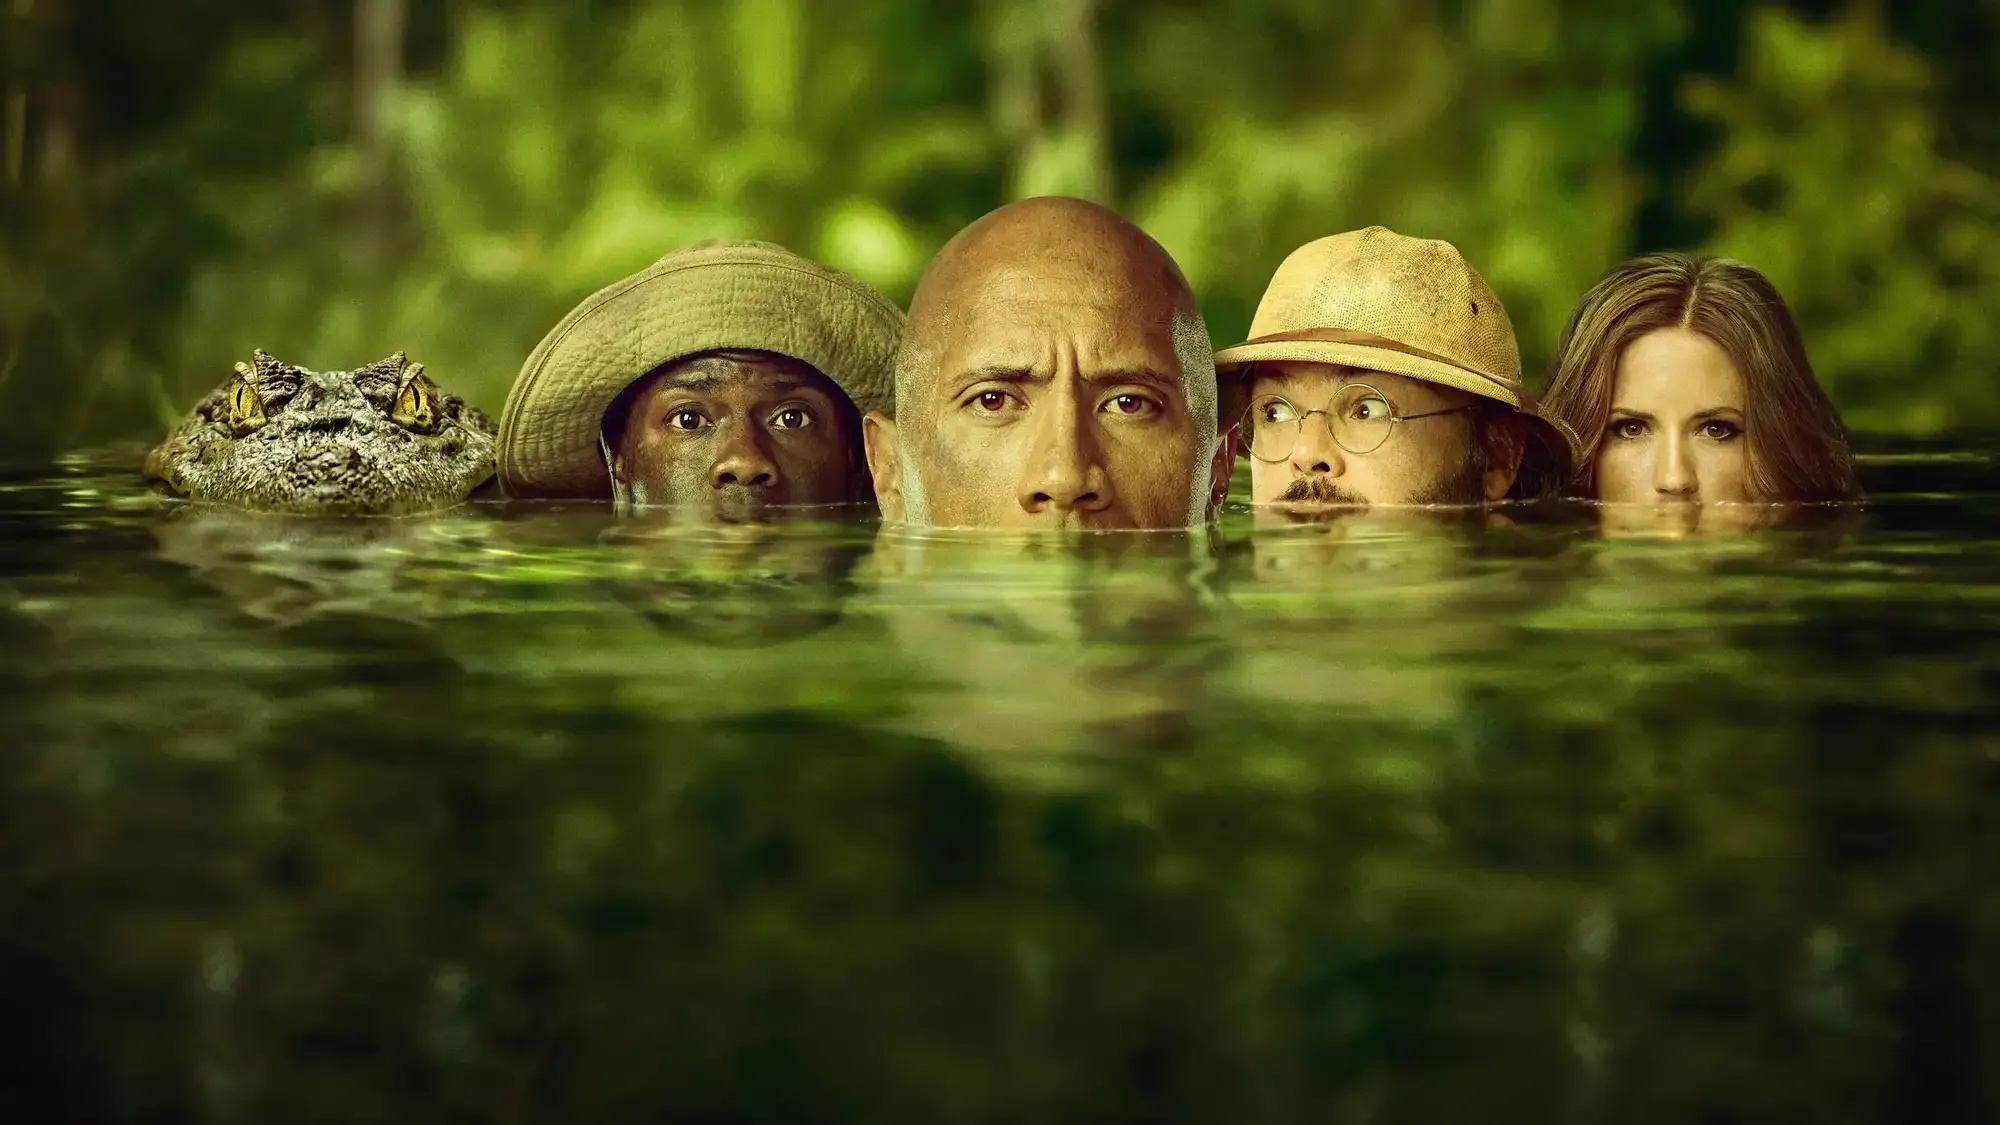 Jumanji: Welcome to the Jungle movie review